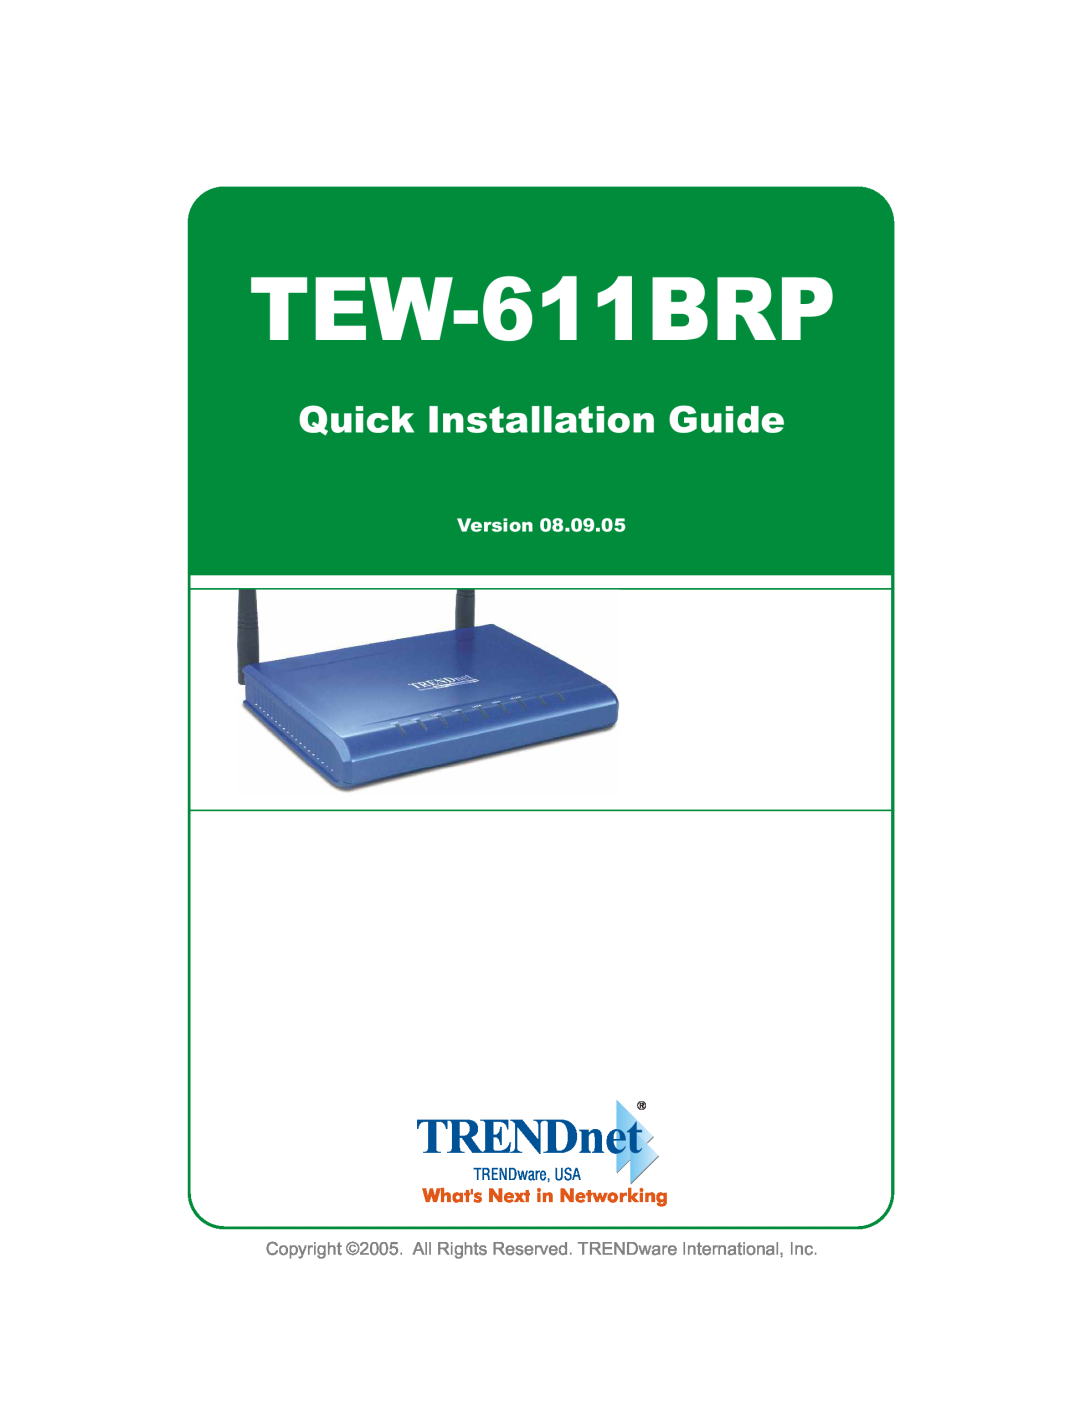 TRENDnet TEW-611BRP manual TRENDnet, Quick Installation Guide, Version, Whats Next in Networking, TRENDware, USA 